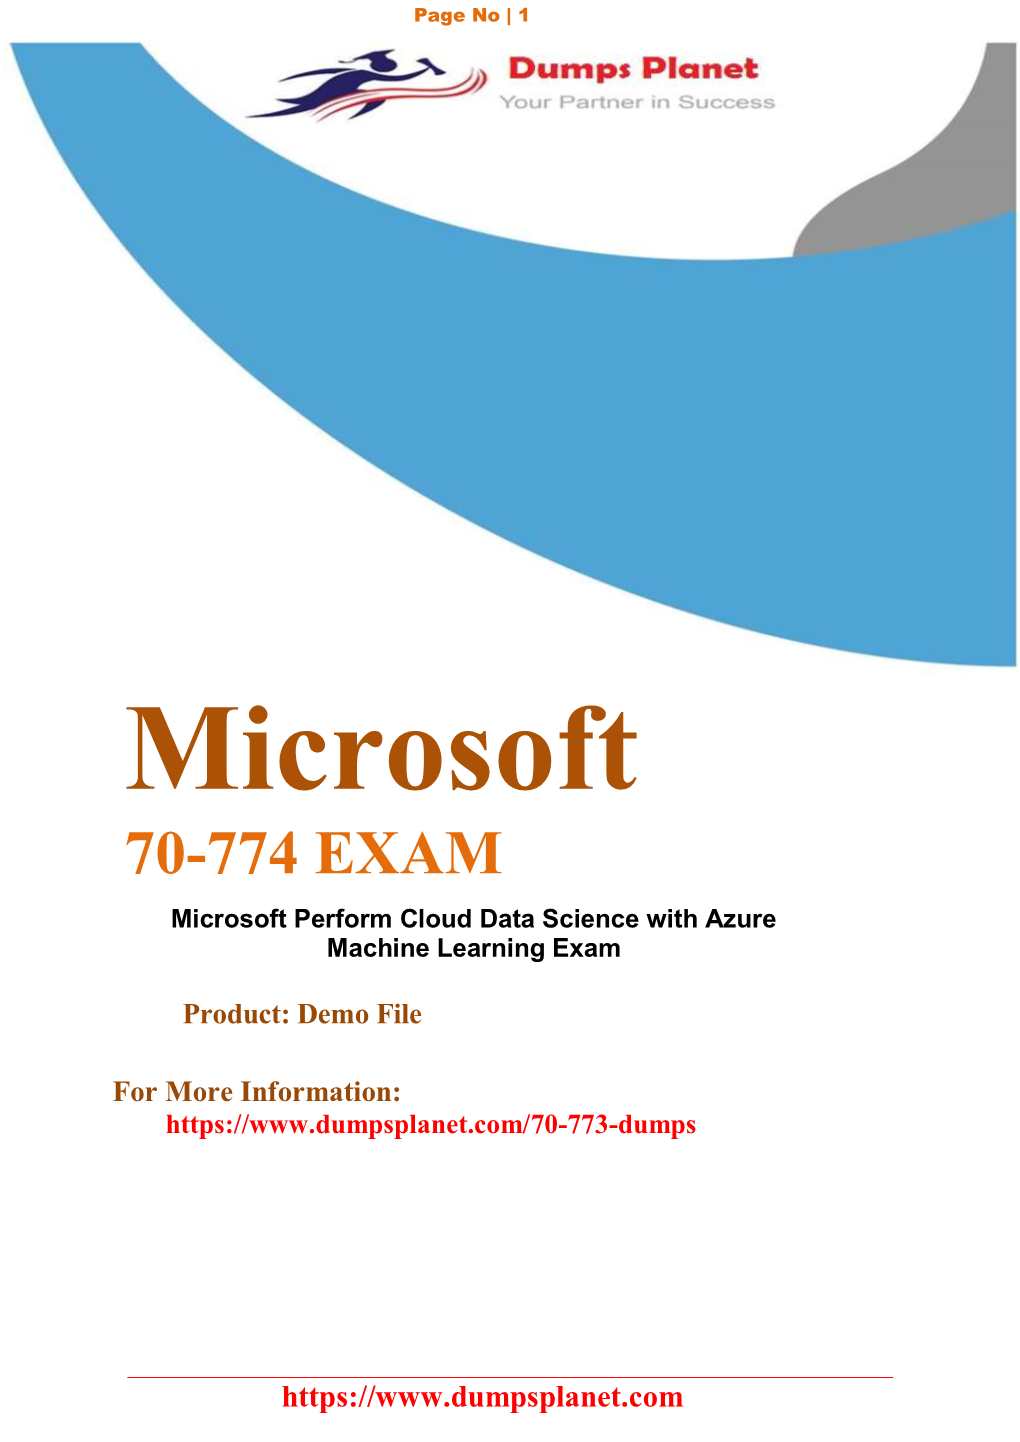 70-774 EXAM Microsoft Perform Cloud Data Science with Azure Machine Learning Exam